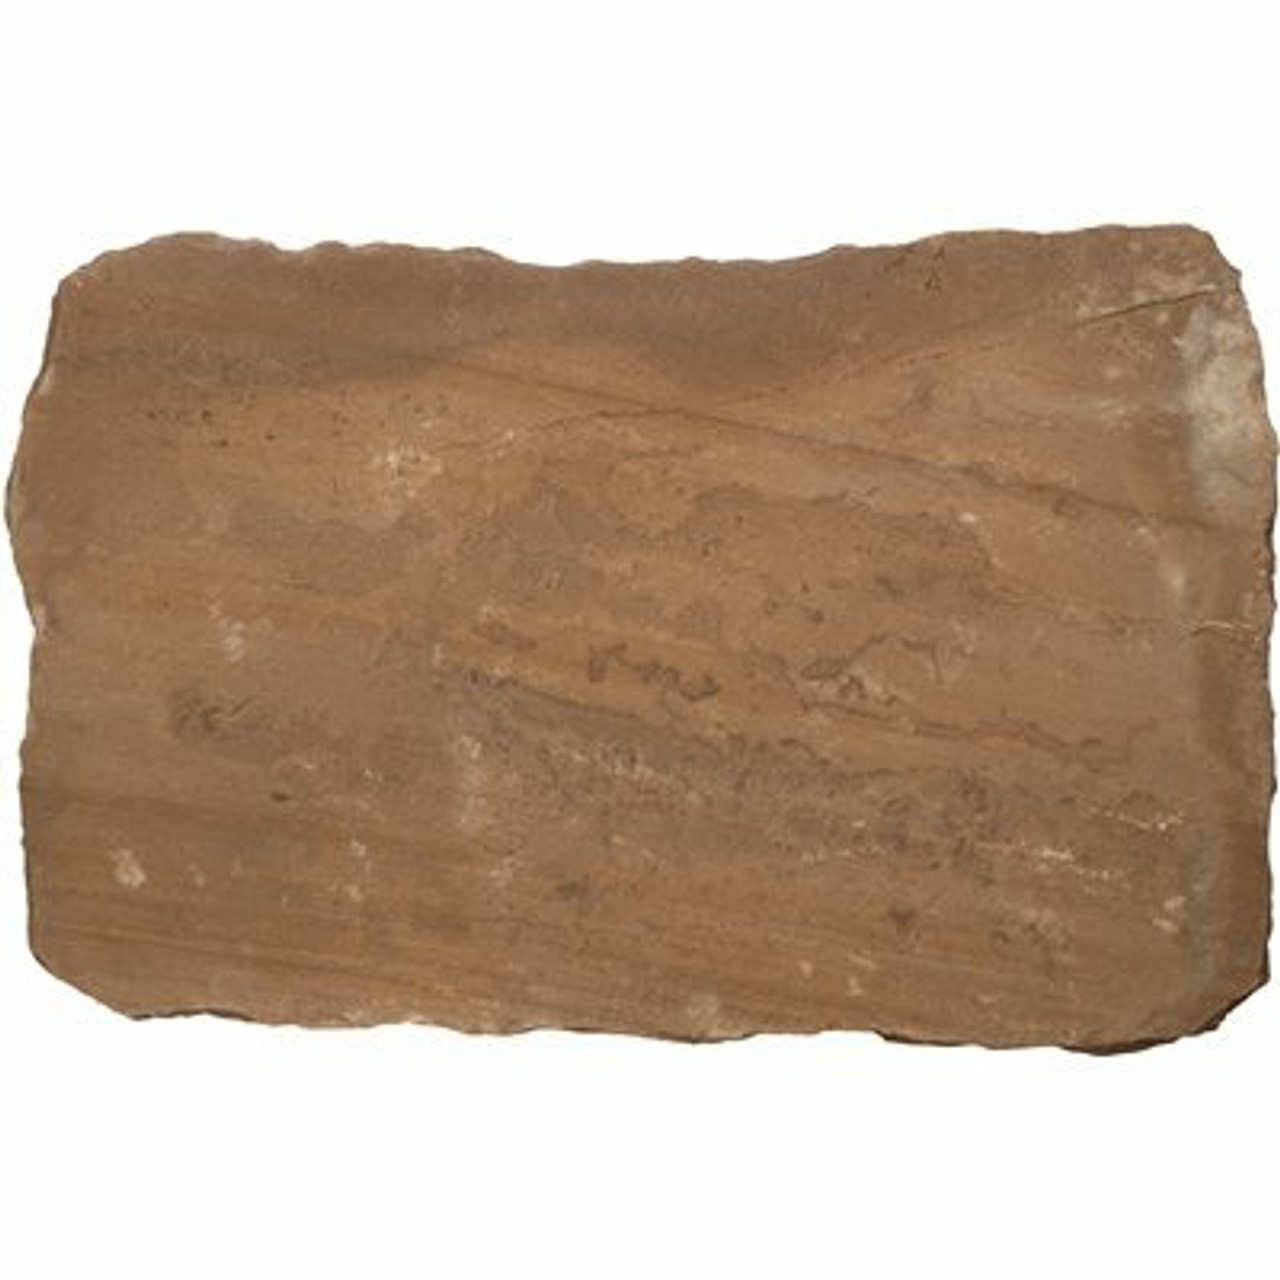 Msi Rustic Canyon 12 In. X 18 In. Natural Sandstone Step Stone (1.5 Sq. Ft./Piece)